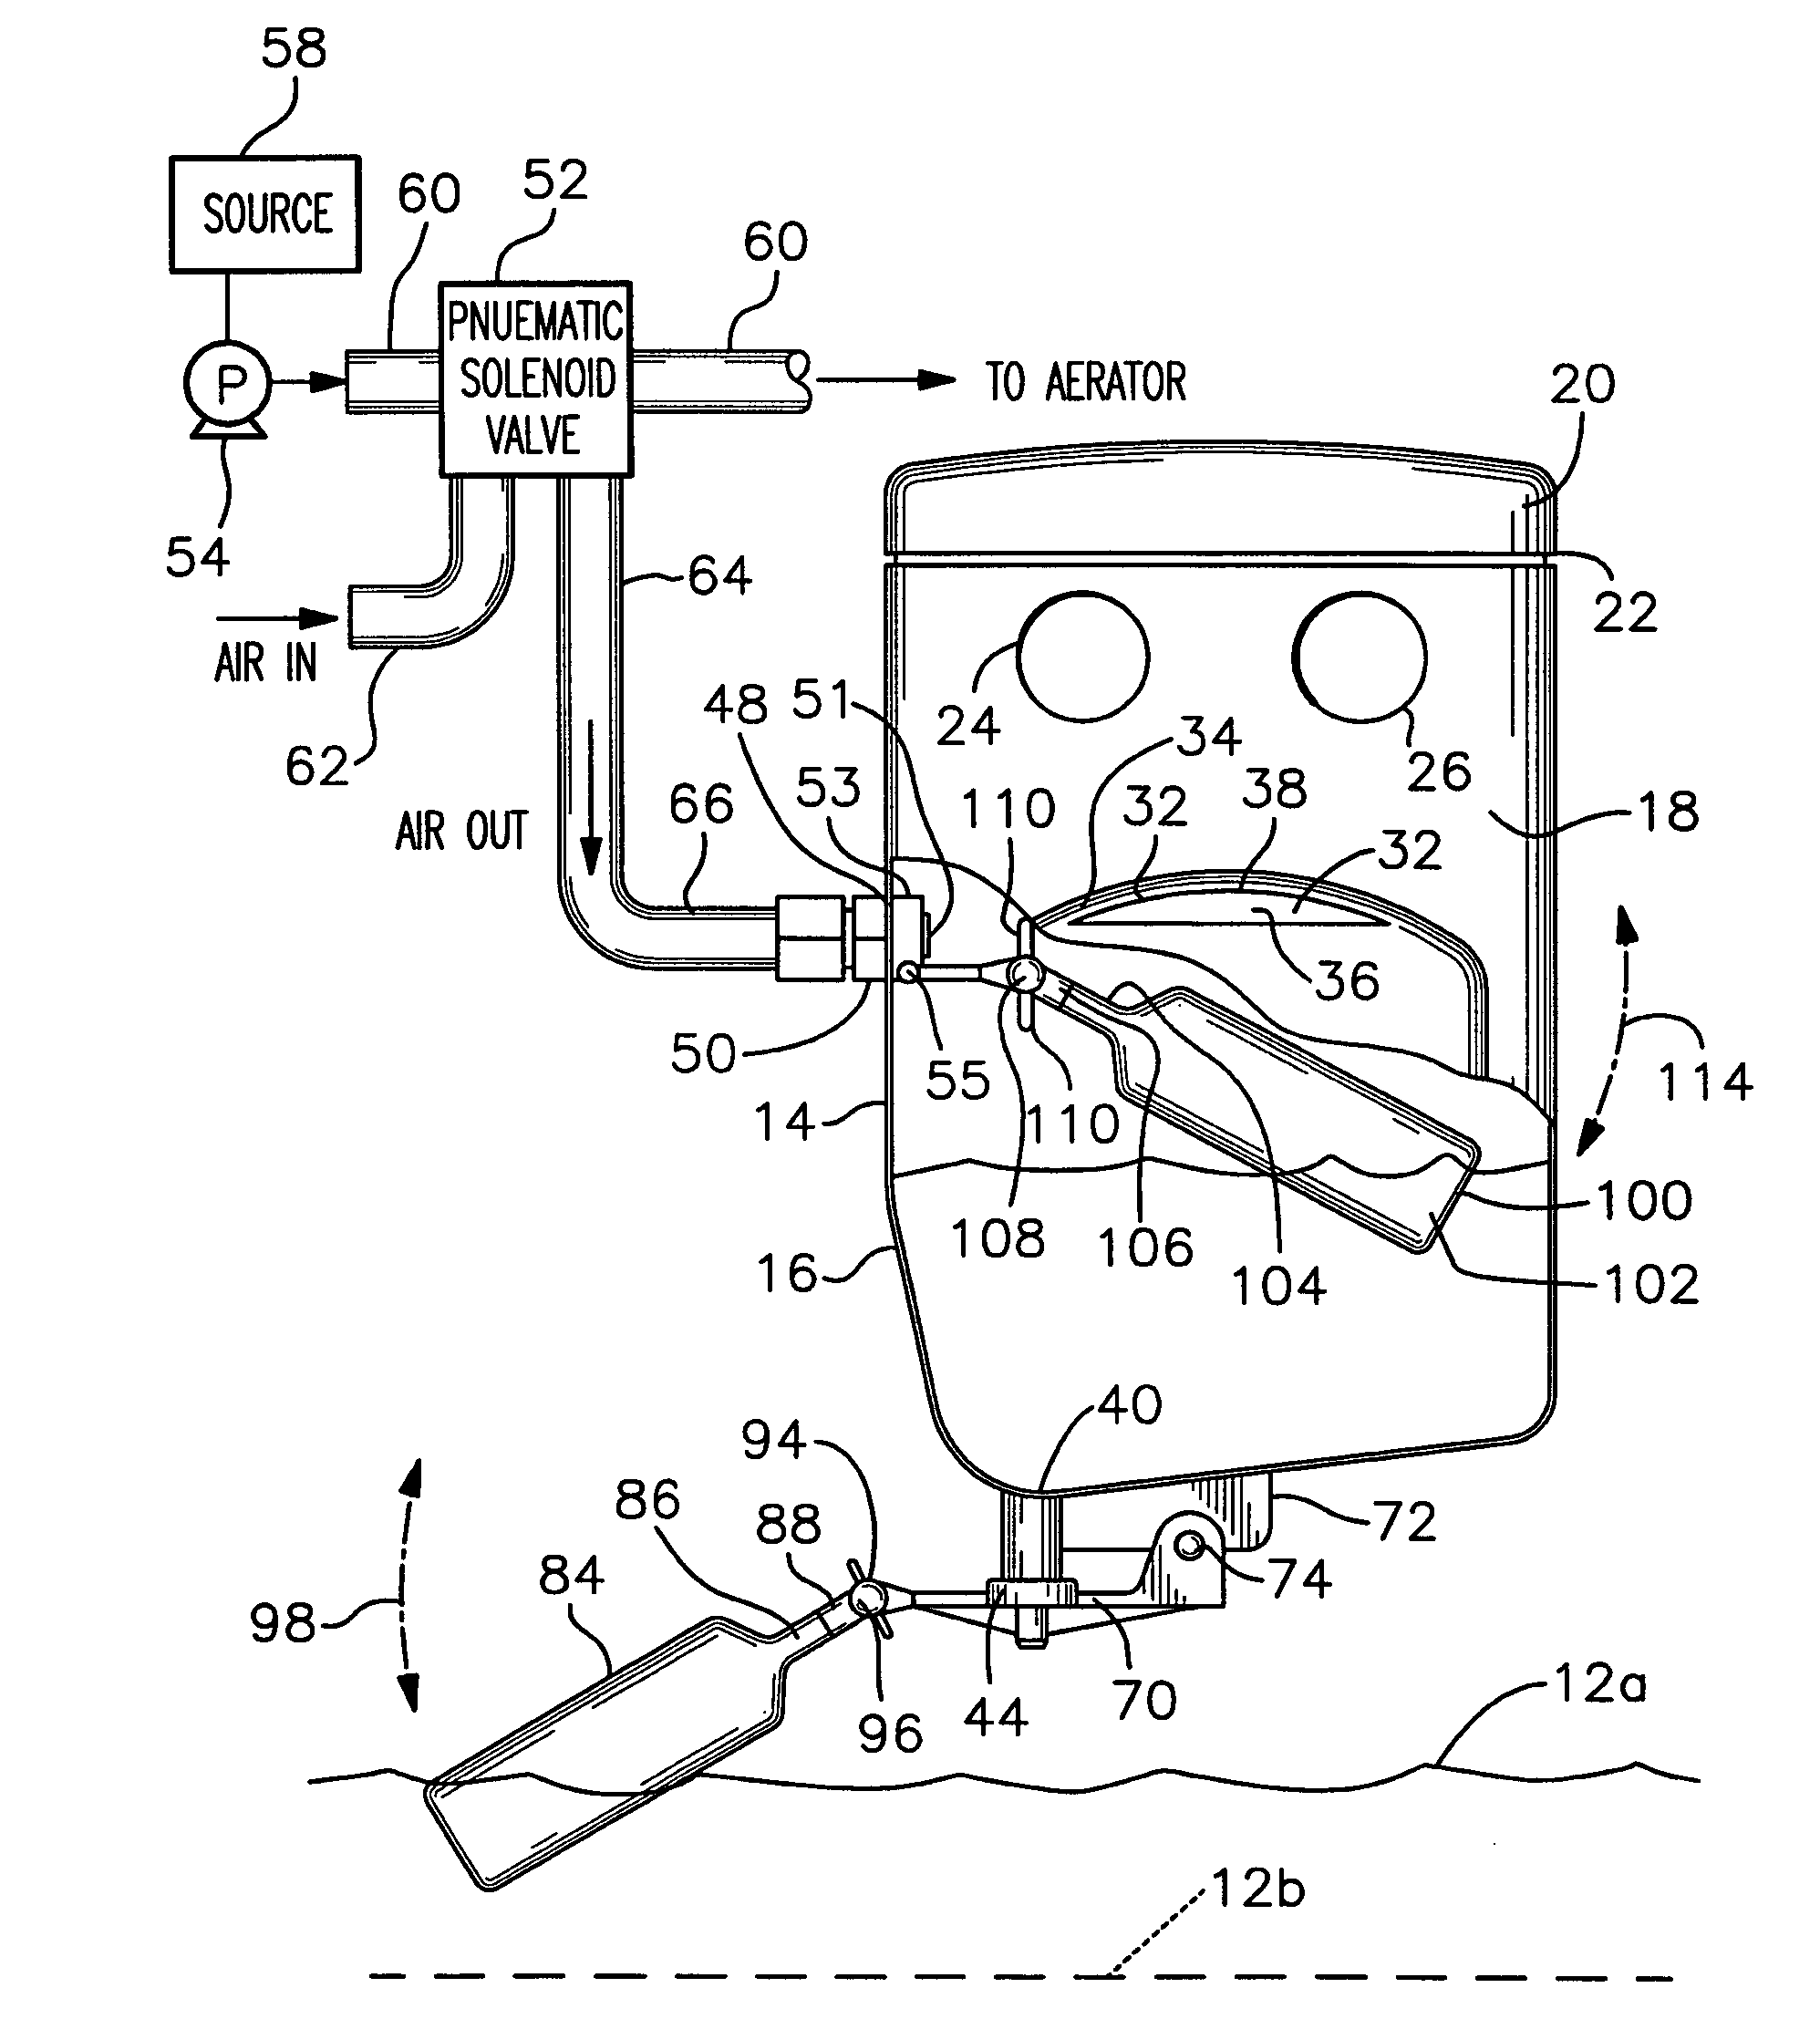 Refill control mechanism for a liquid holding tank